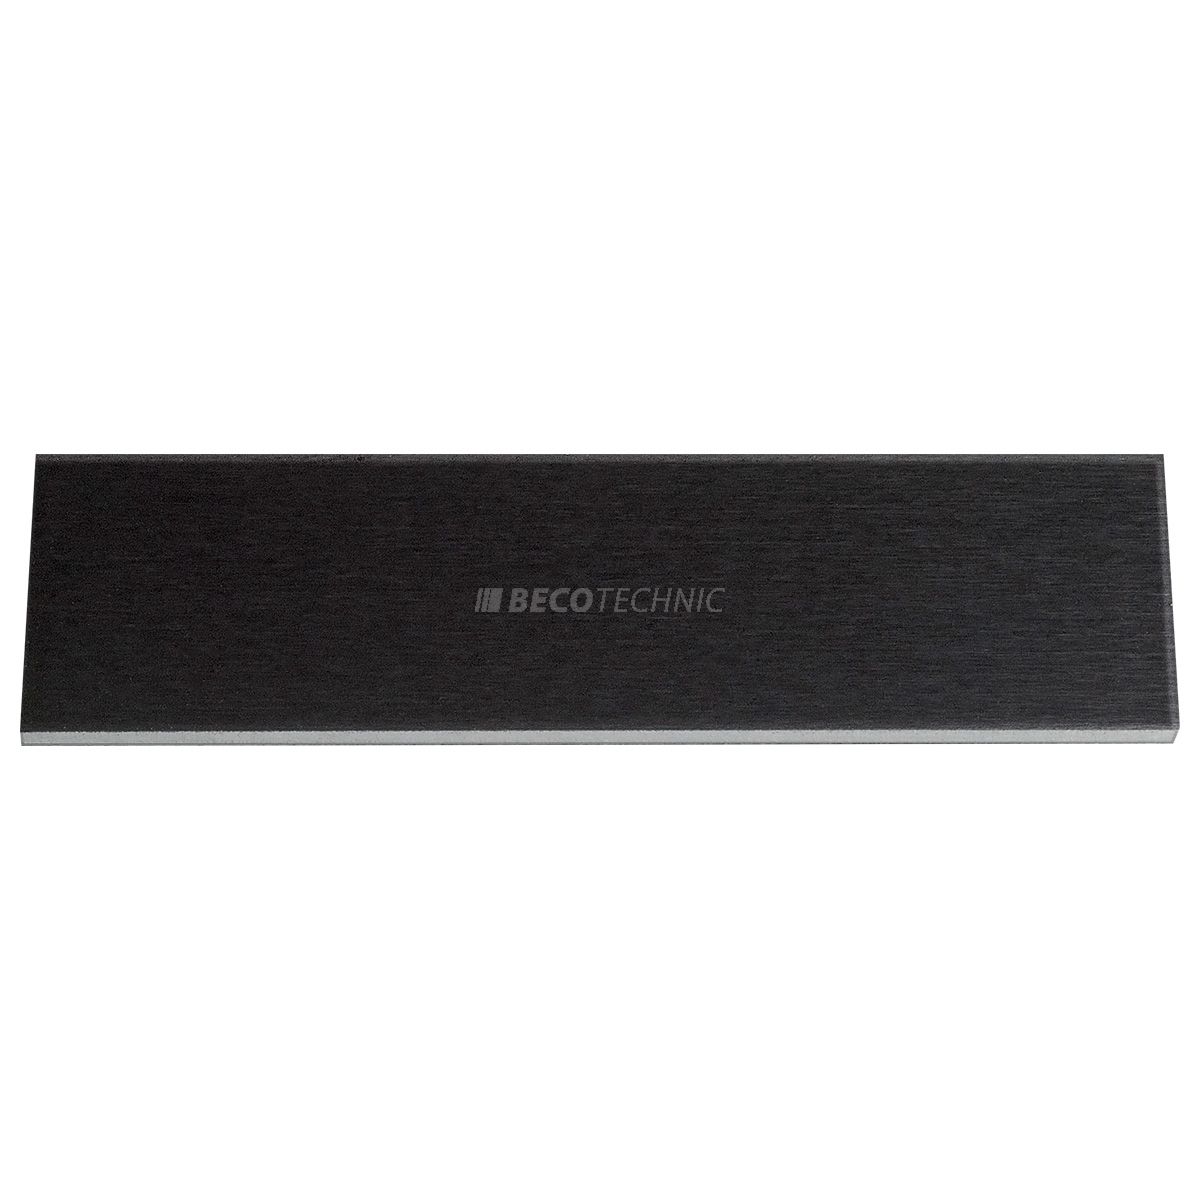 Engraving plate, black aluminum, rectangular, 50 x 15 mm, 1 mm thick, with adhesive, no hole